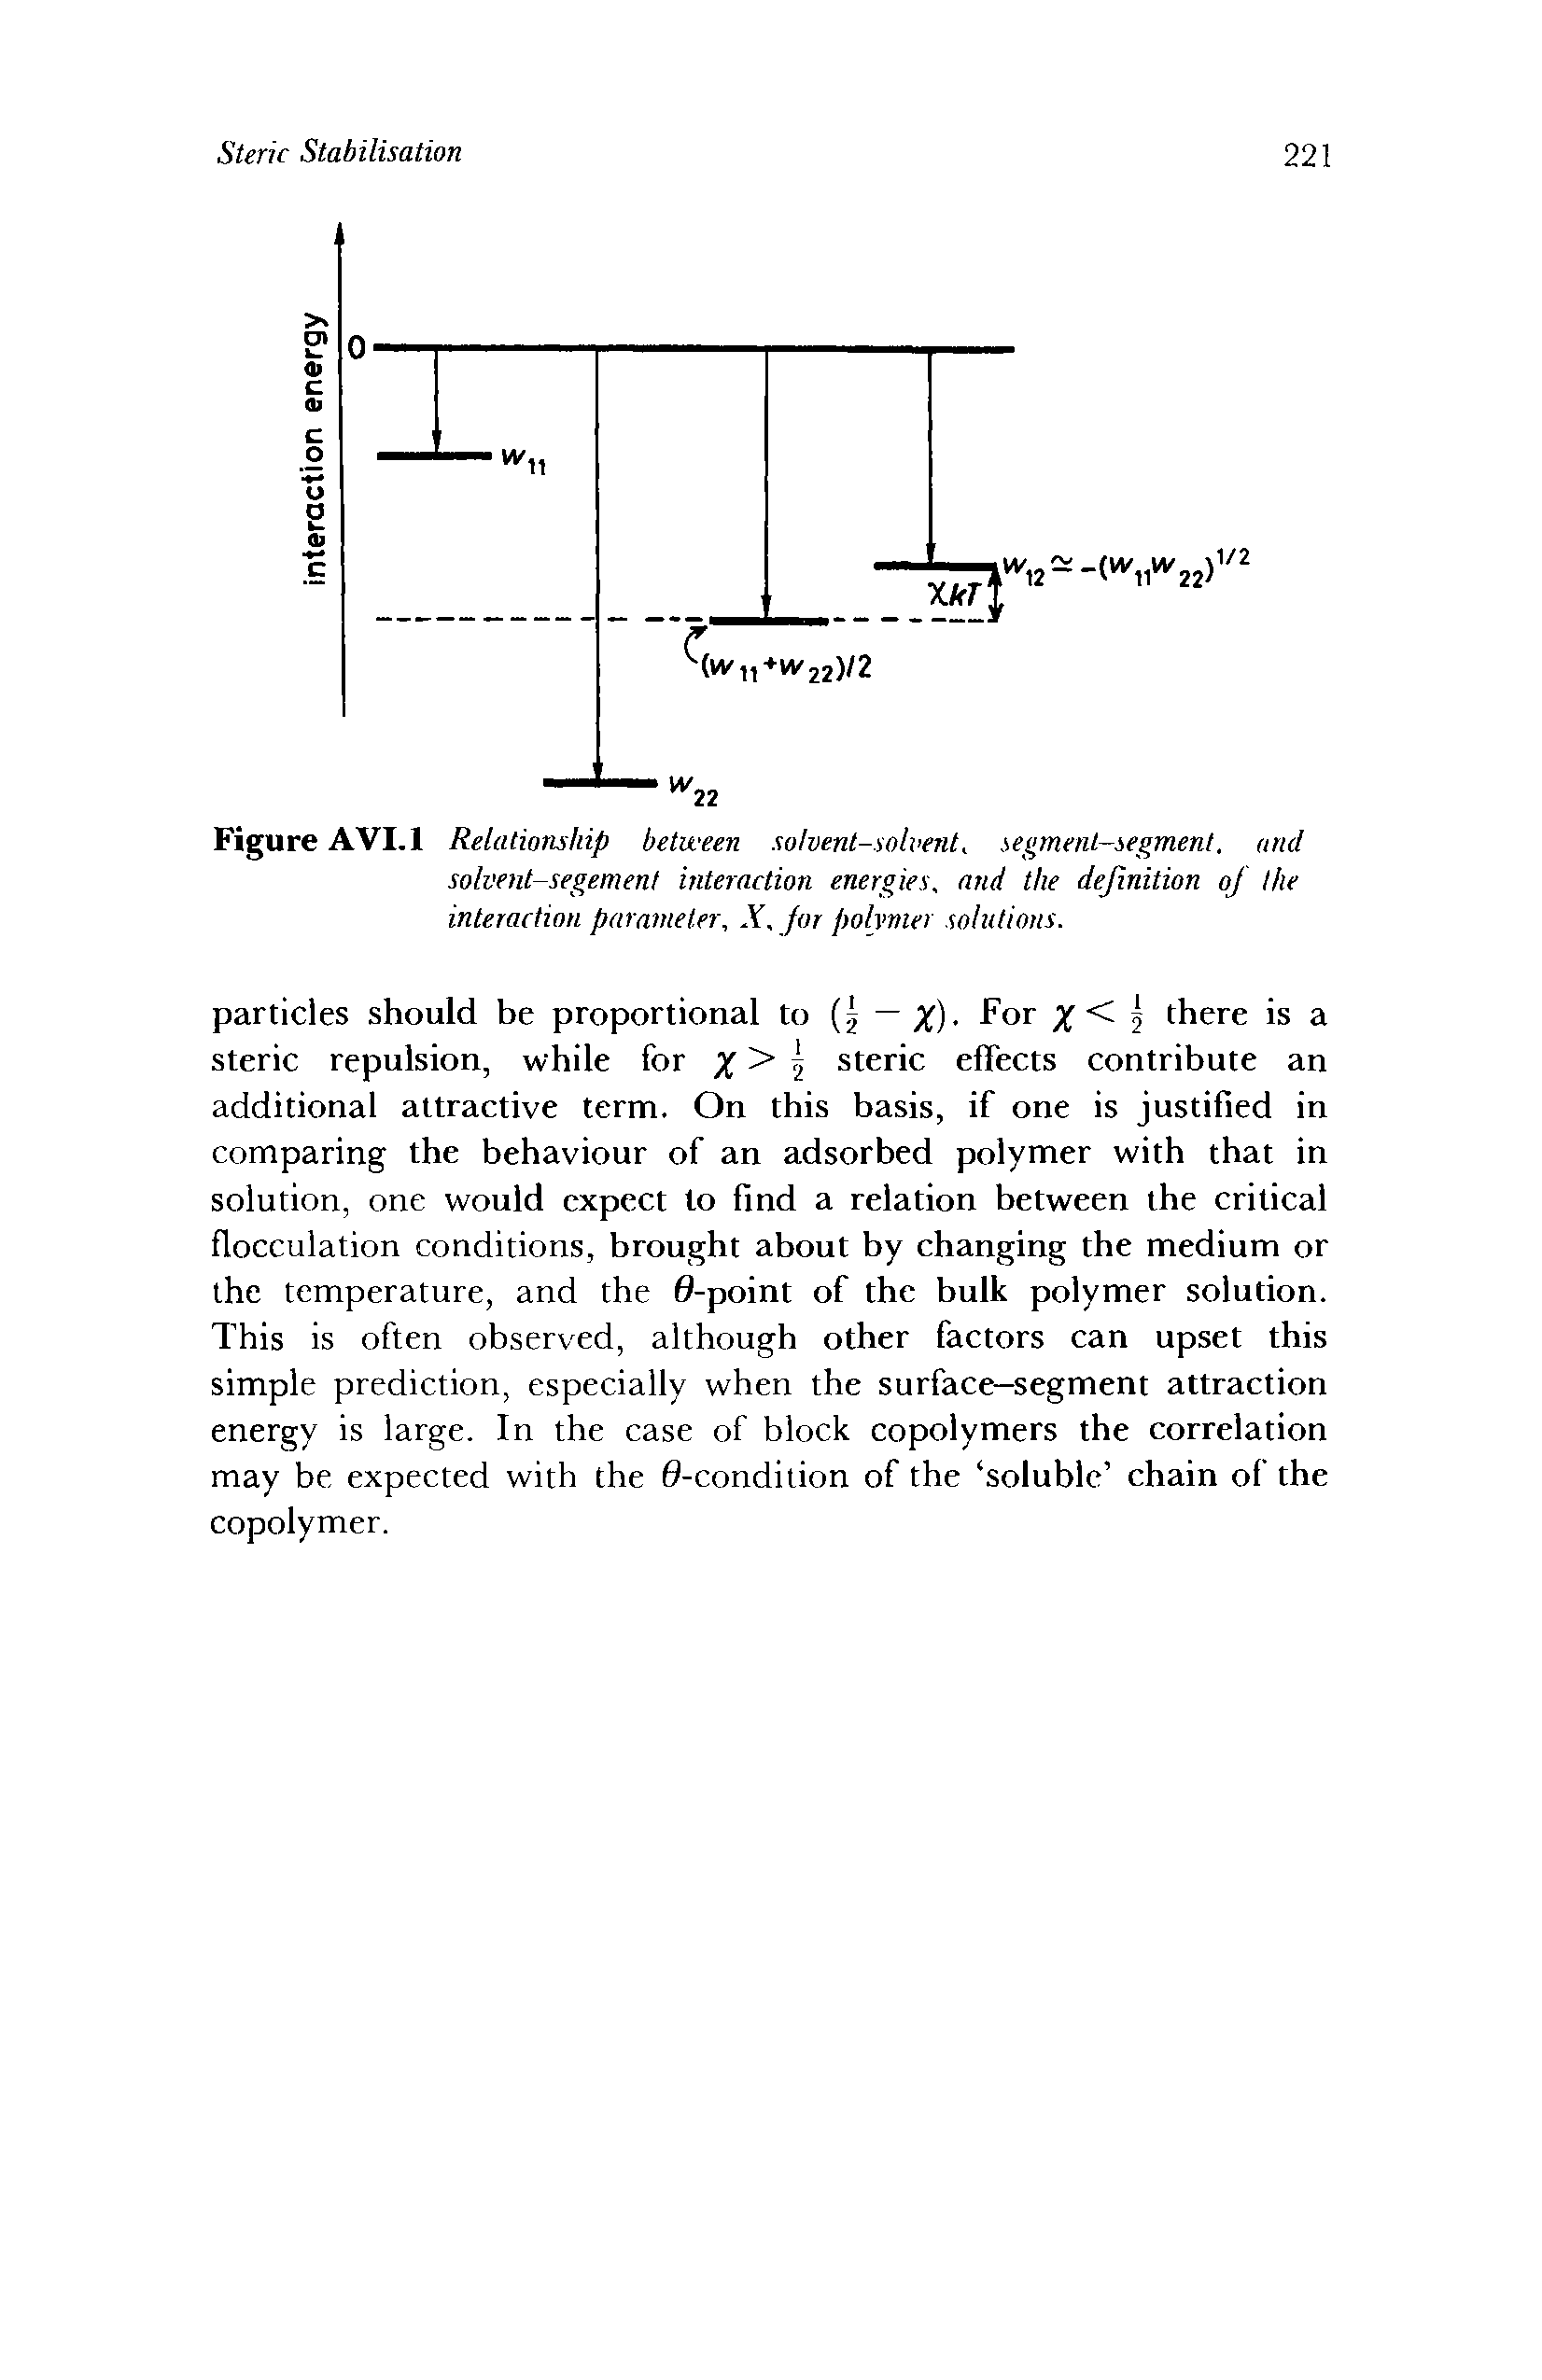 Figure AVI.l Relationship between solvent-solvent, segment-segment. and solvent-segement interaction energies, and the definition of the interaction parameter, X, for polymer solutions.